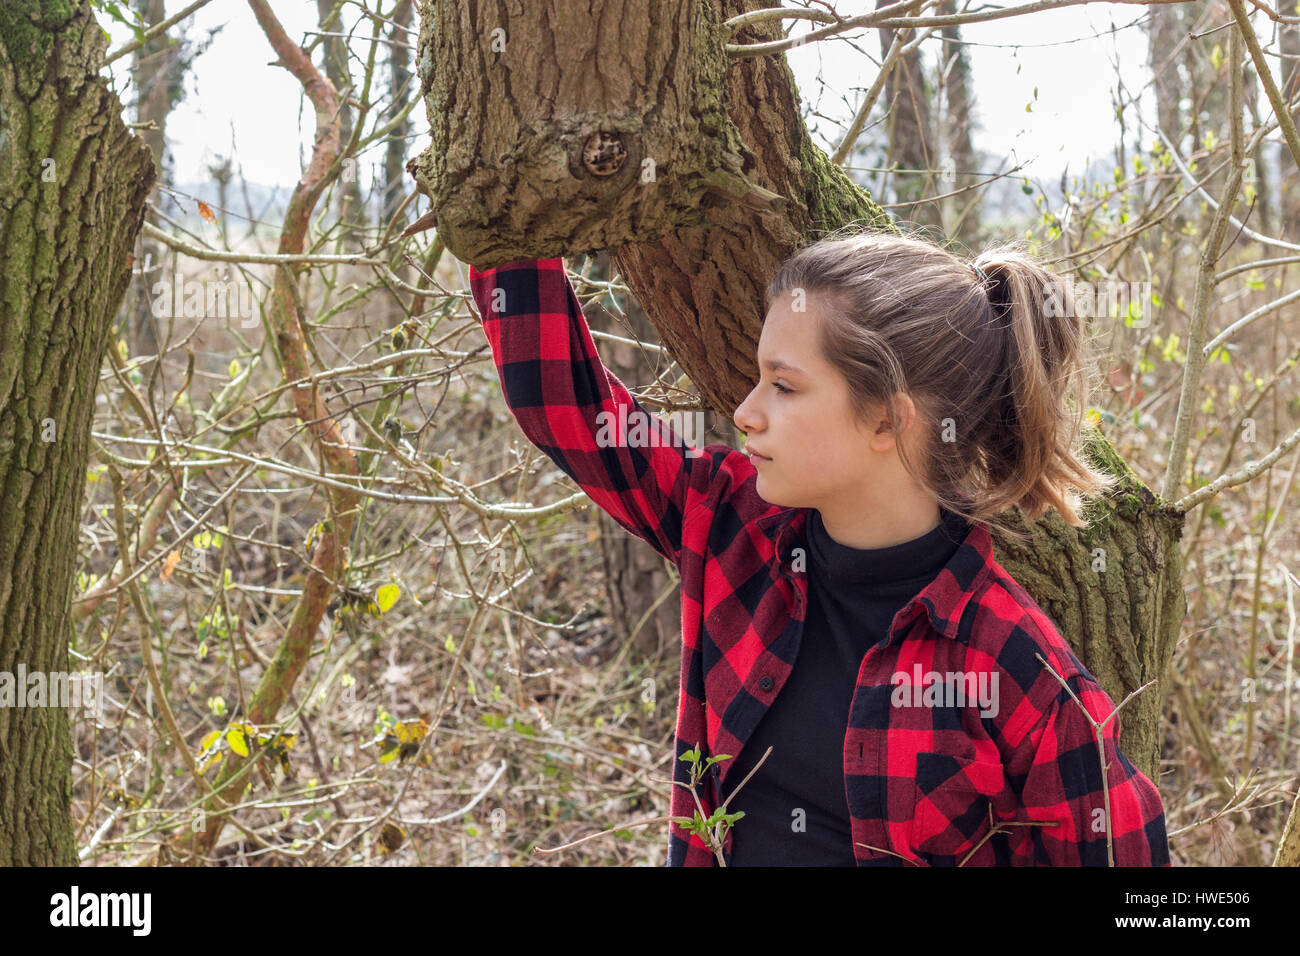 A pretty girl with checkered shirt in forest Stock Photo